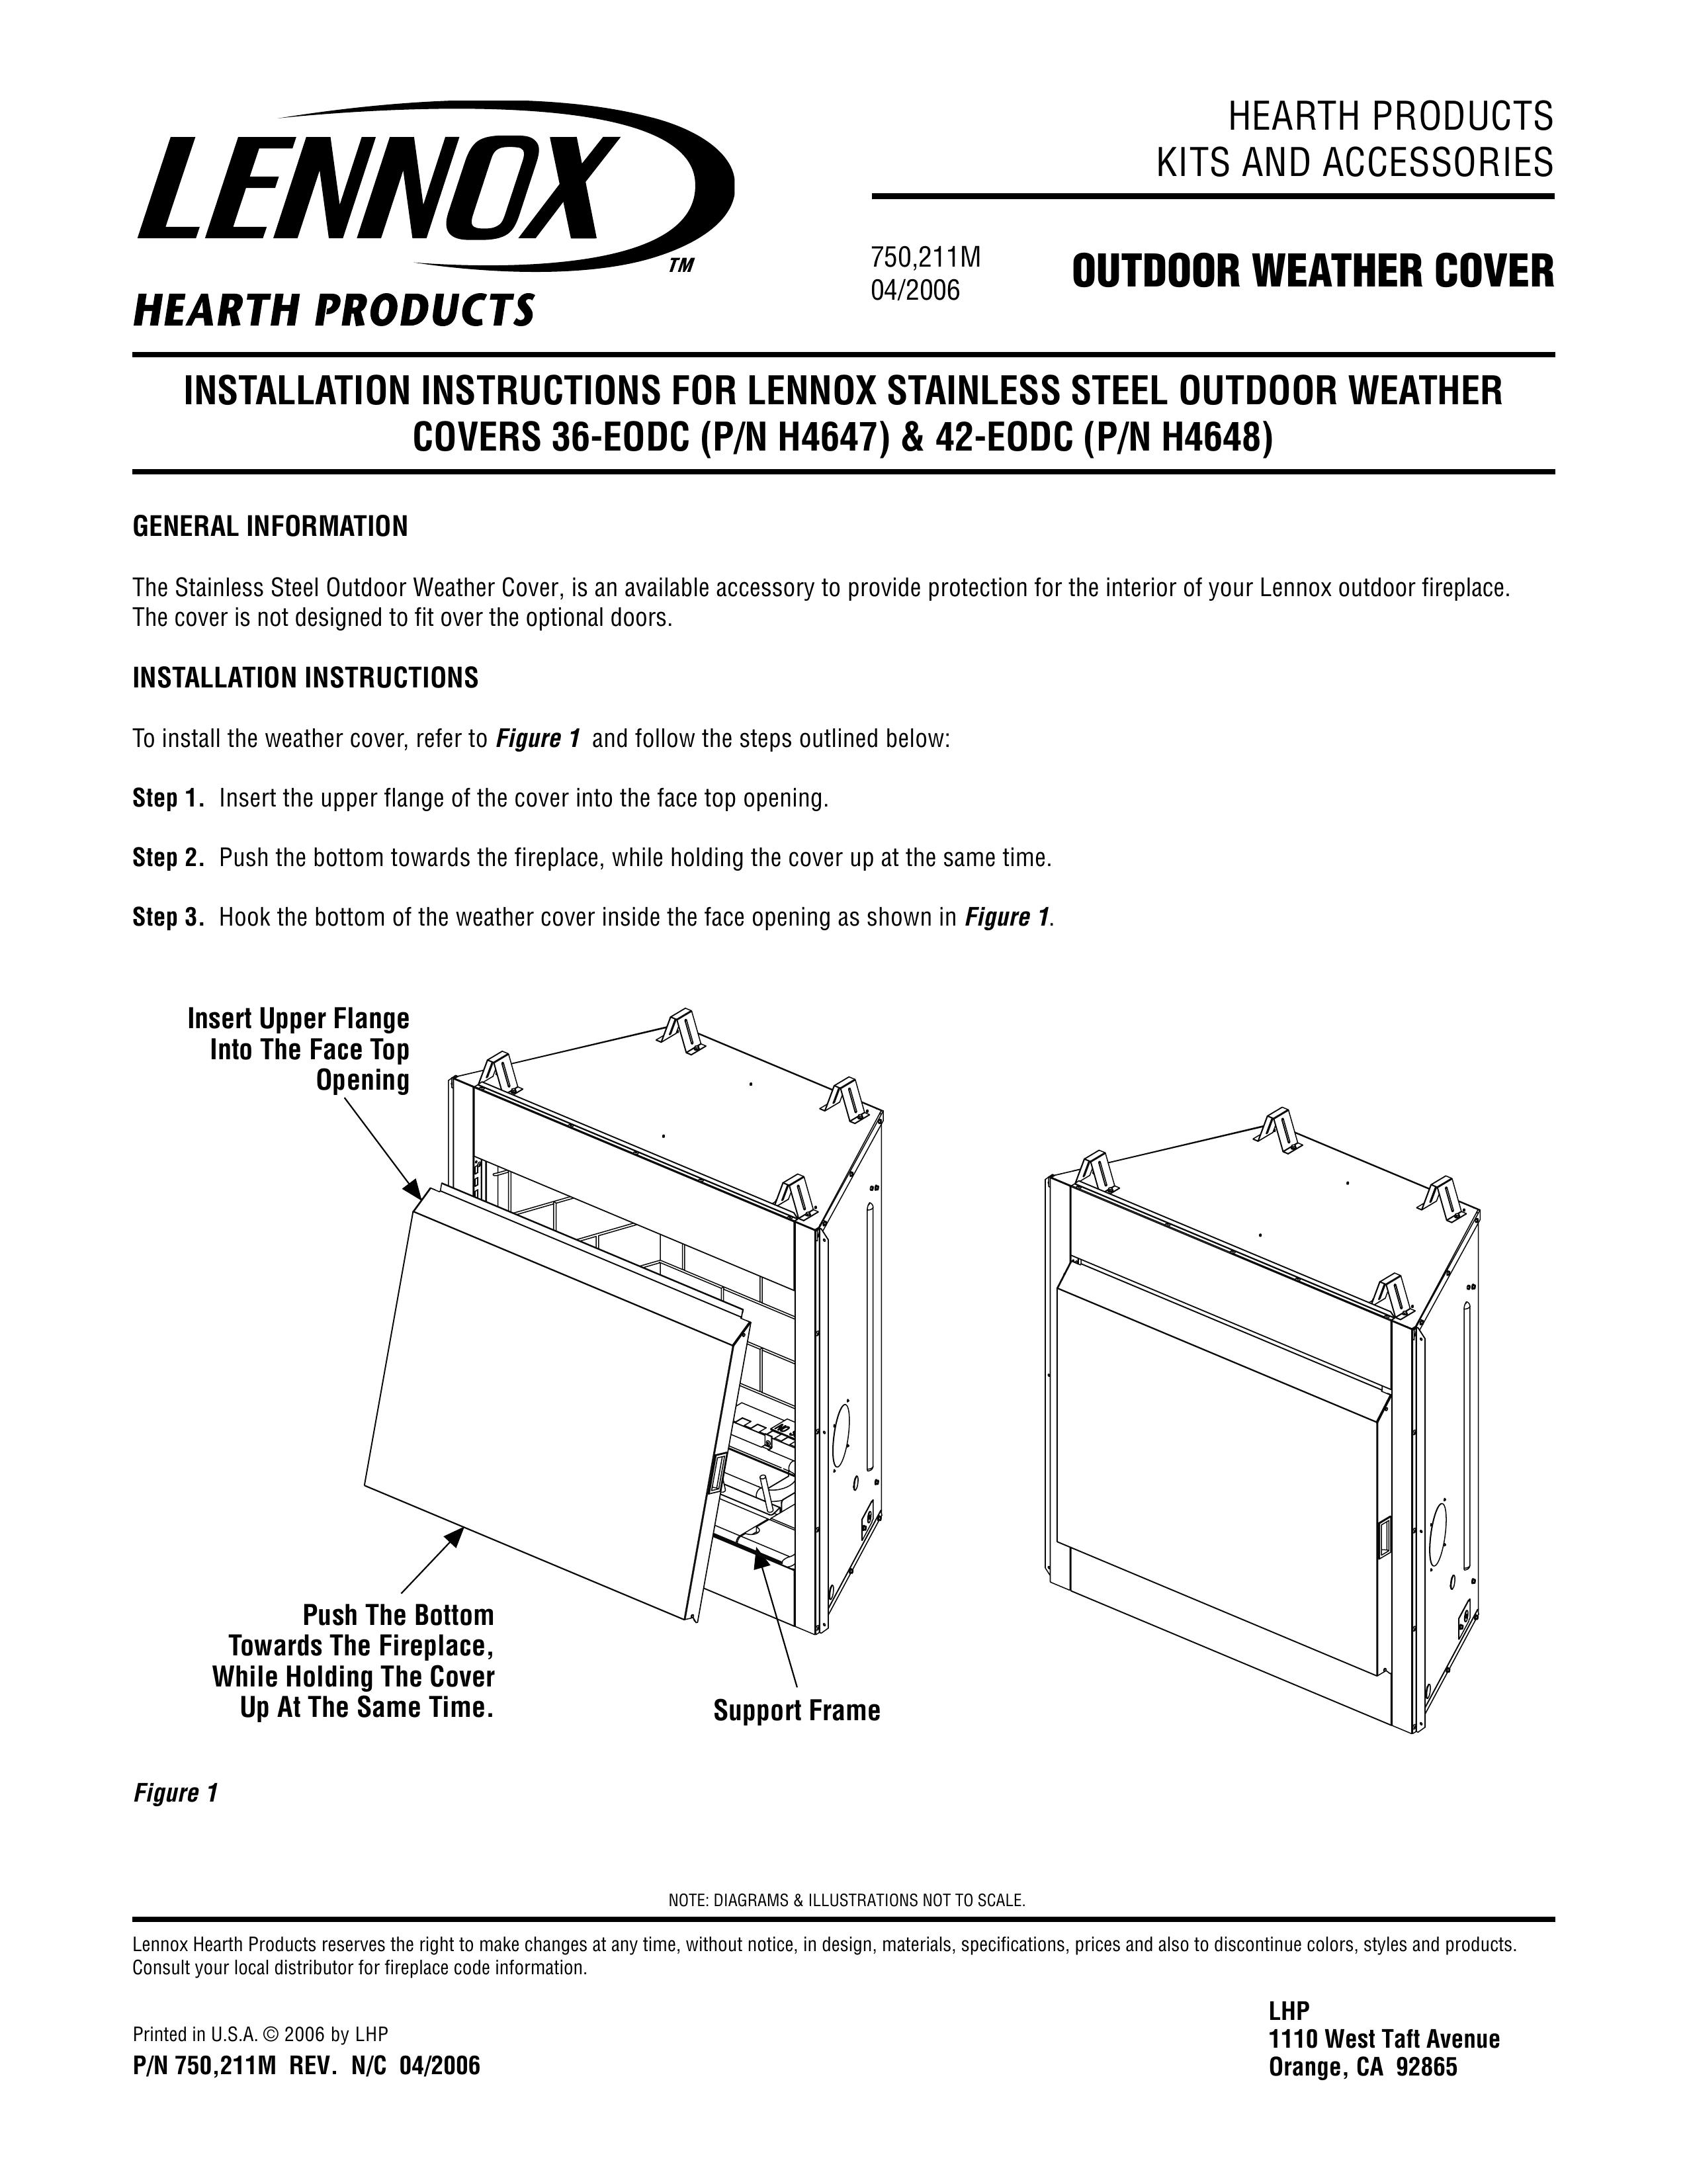 Lennox Hearth 36-EODC Outdoor Fireplace User Manual